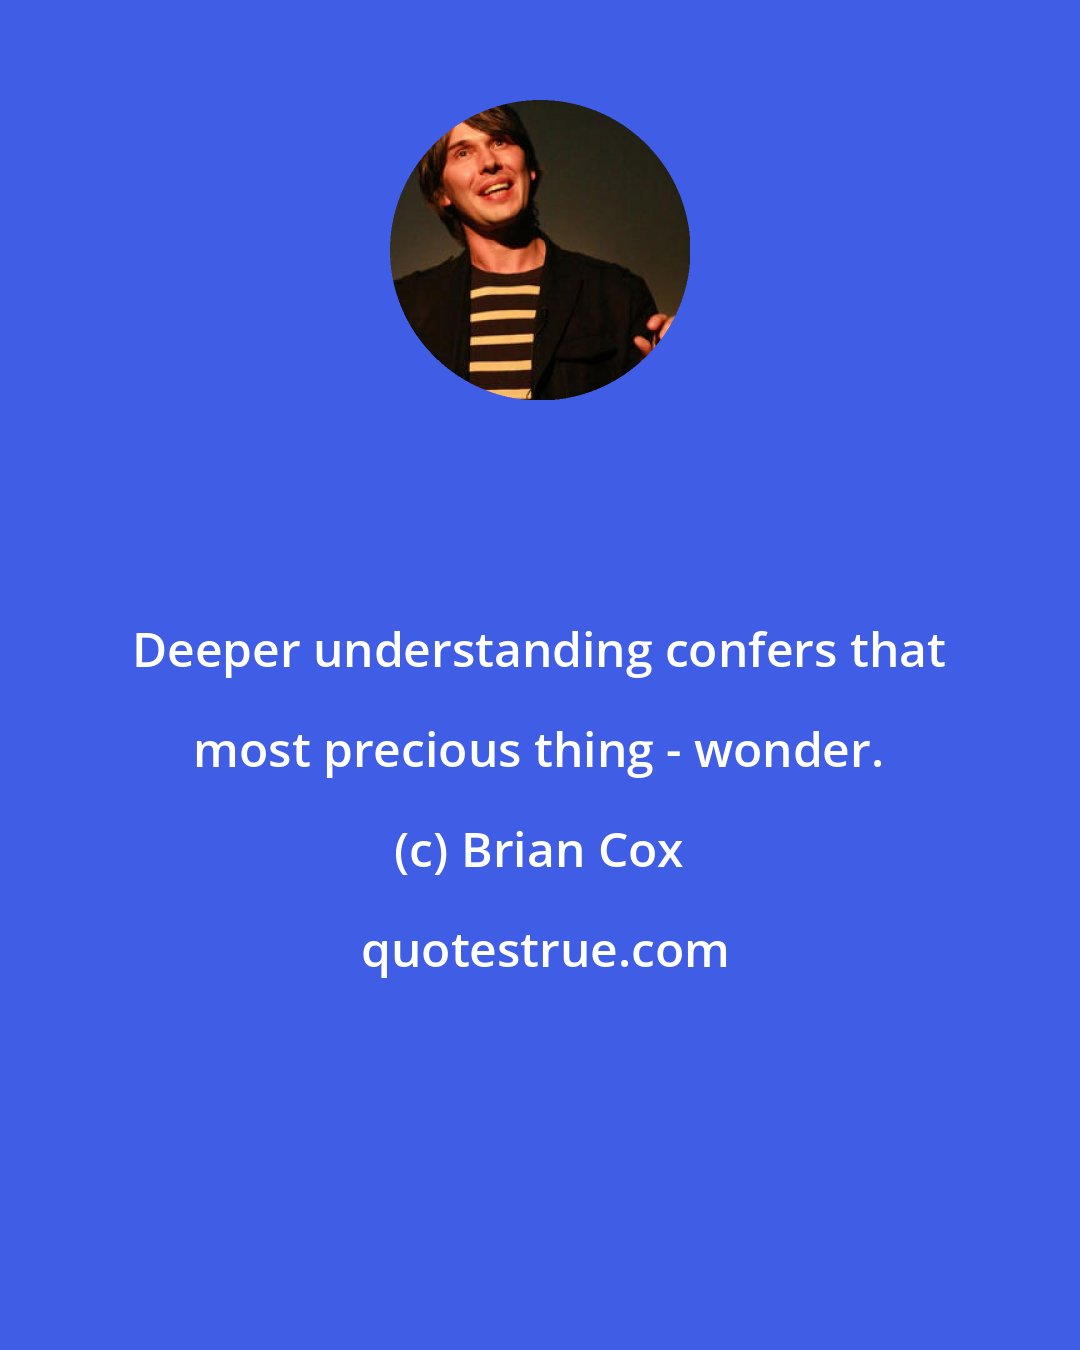 Brian Cox: Deeper understanding confers that most precious thing - wonder.